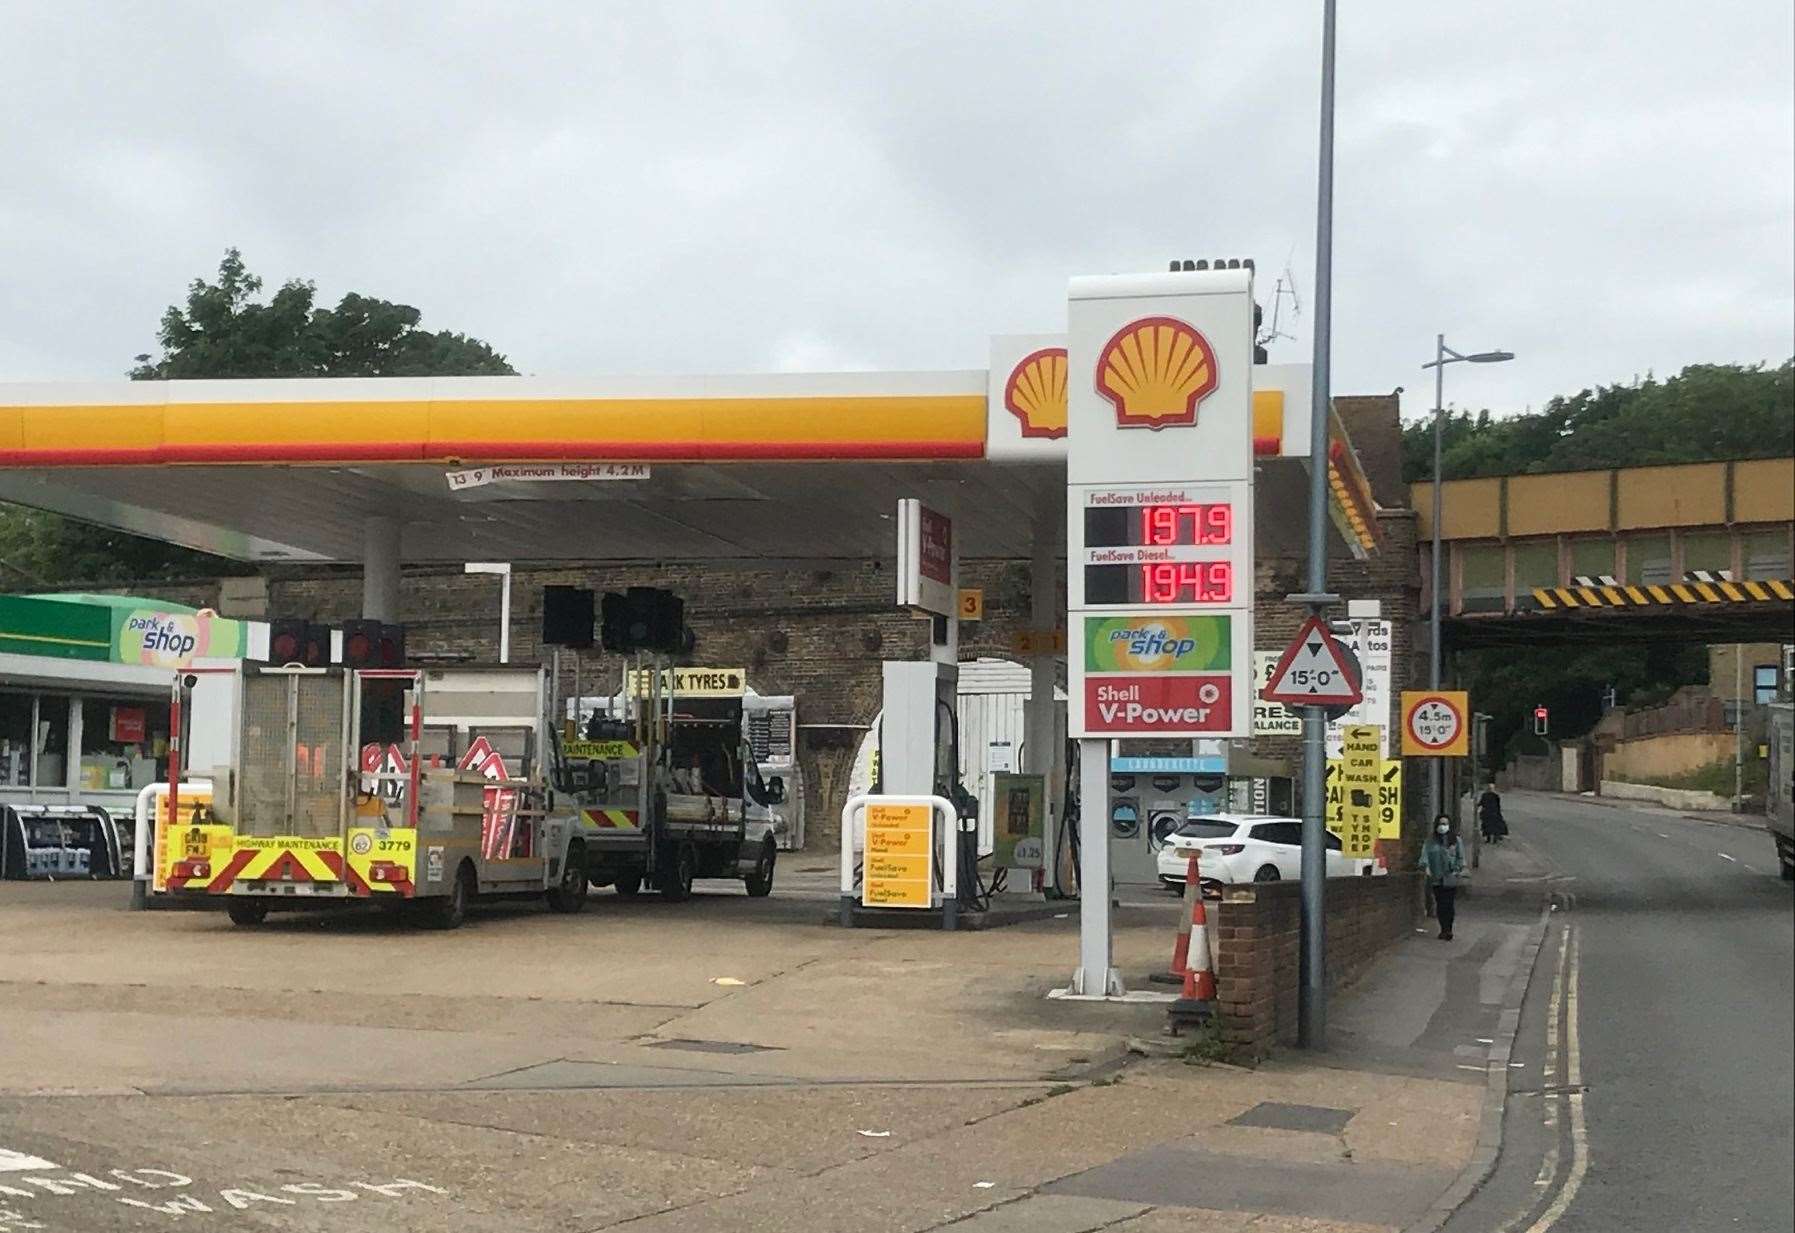 Shell garage in Strood matches Texaco's prices